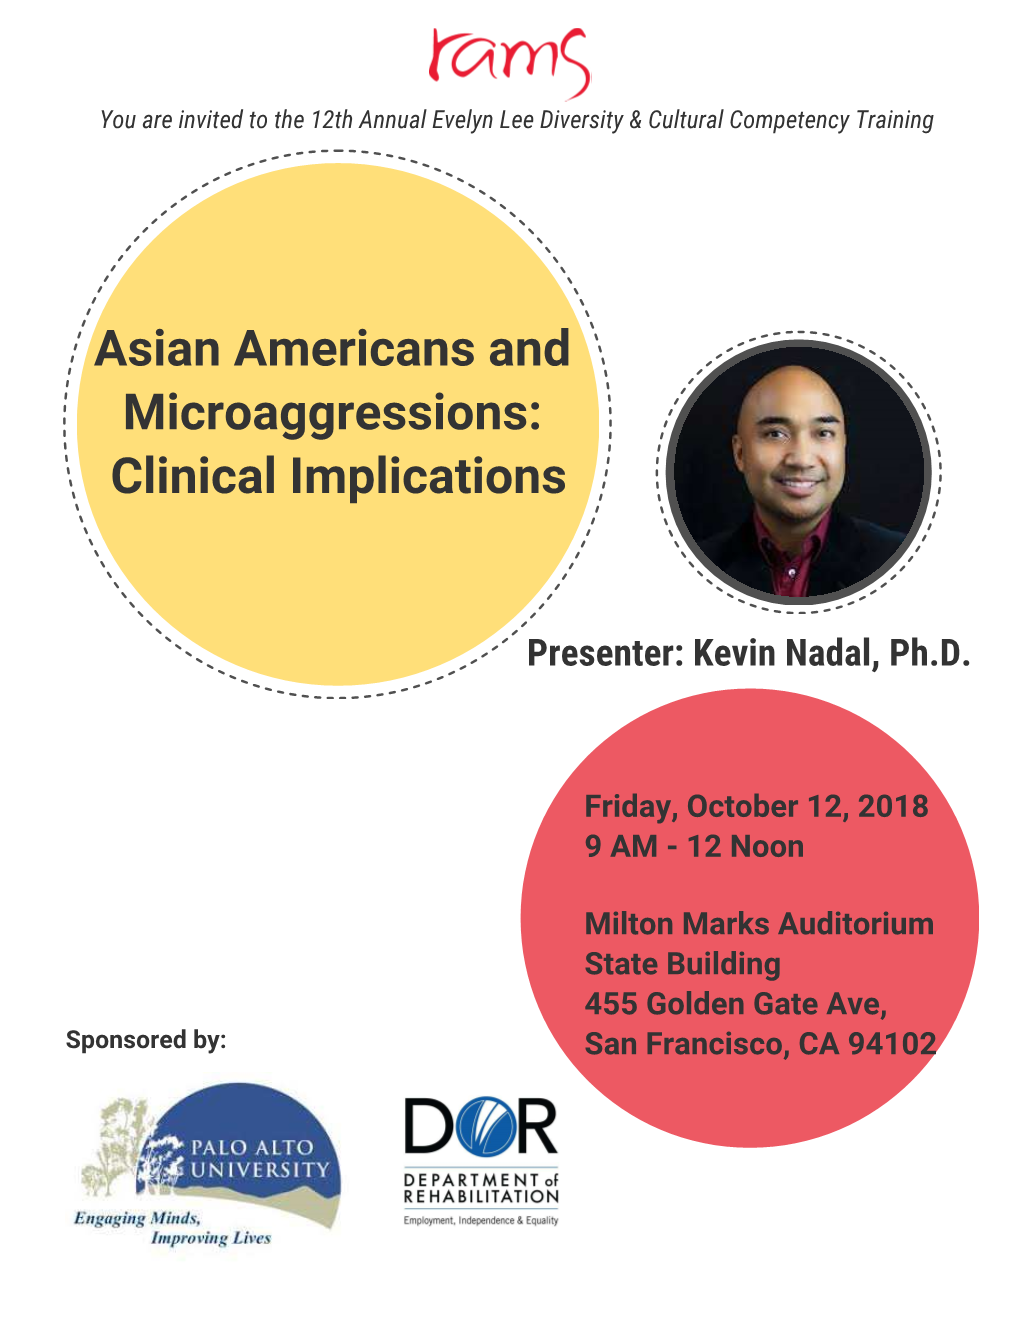 Asian Americans and Microaggressions: Clinical Implications